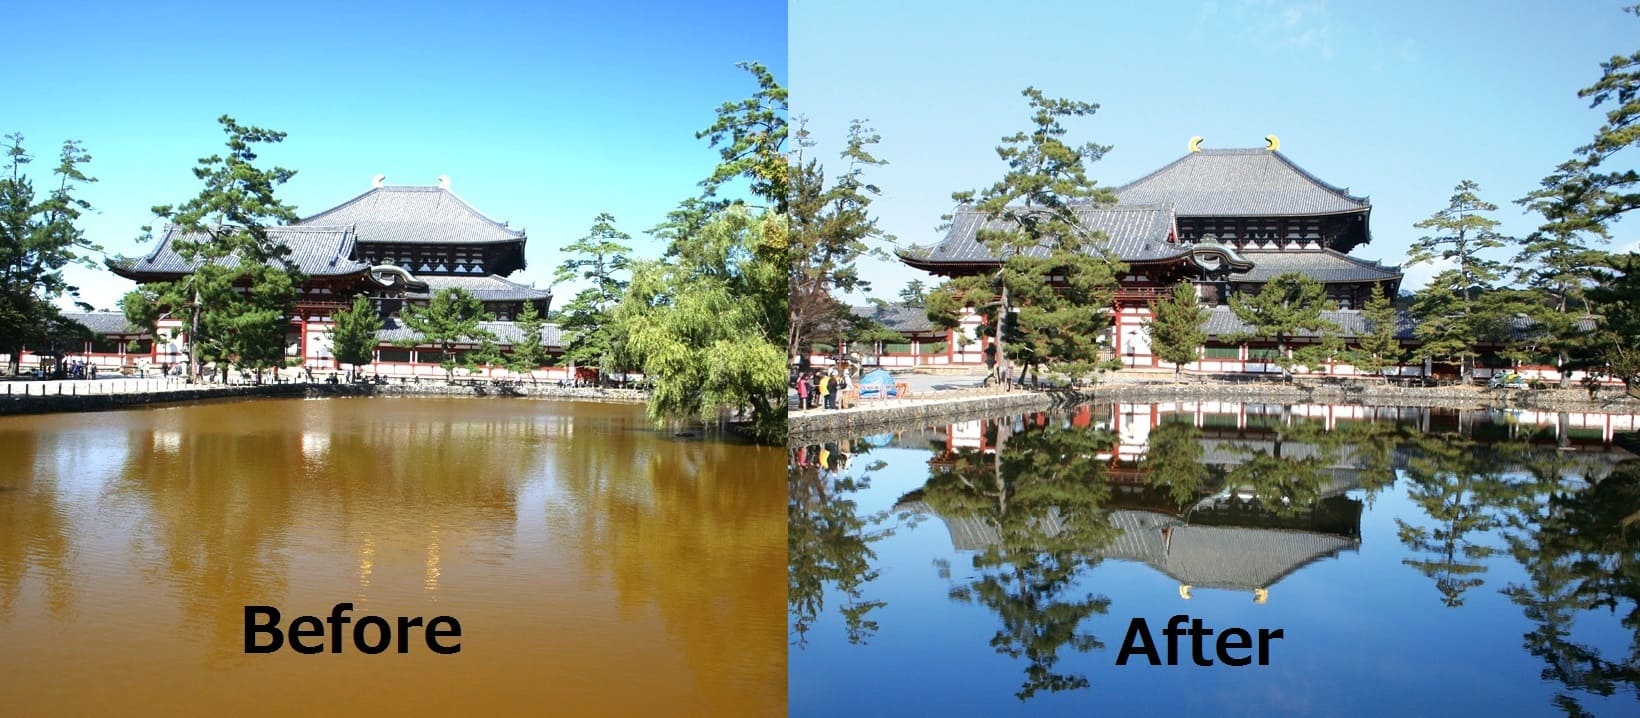 World Cultural Heritage Temple Pond Became Clean